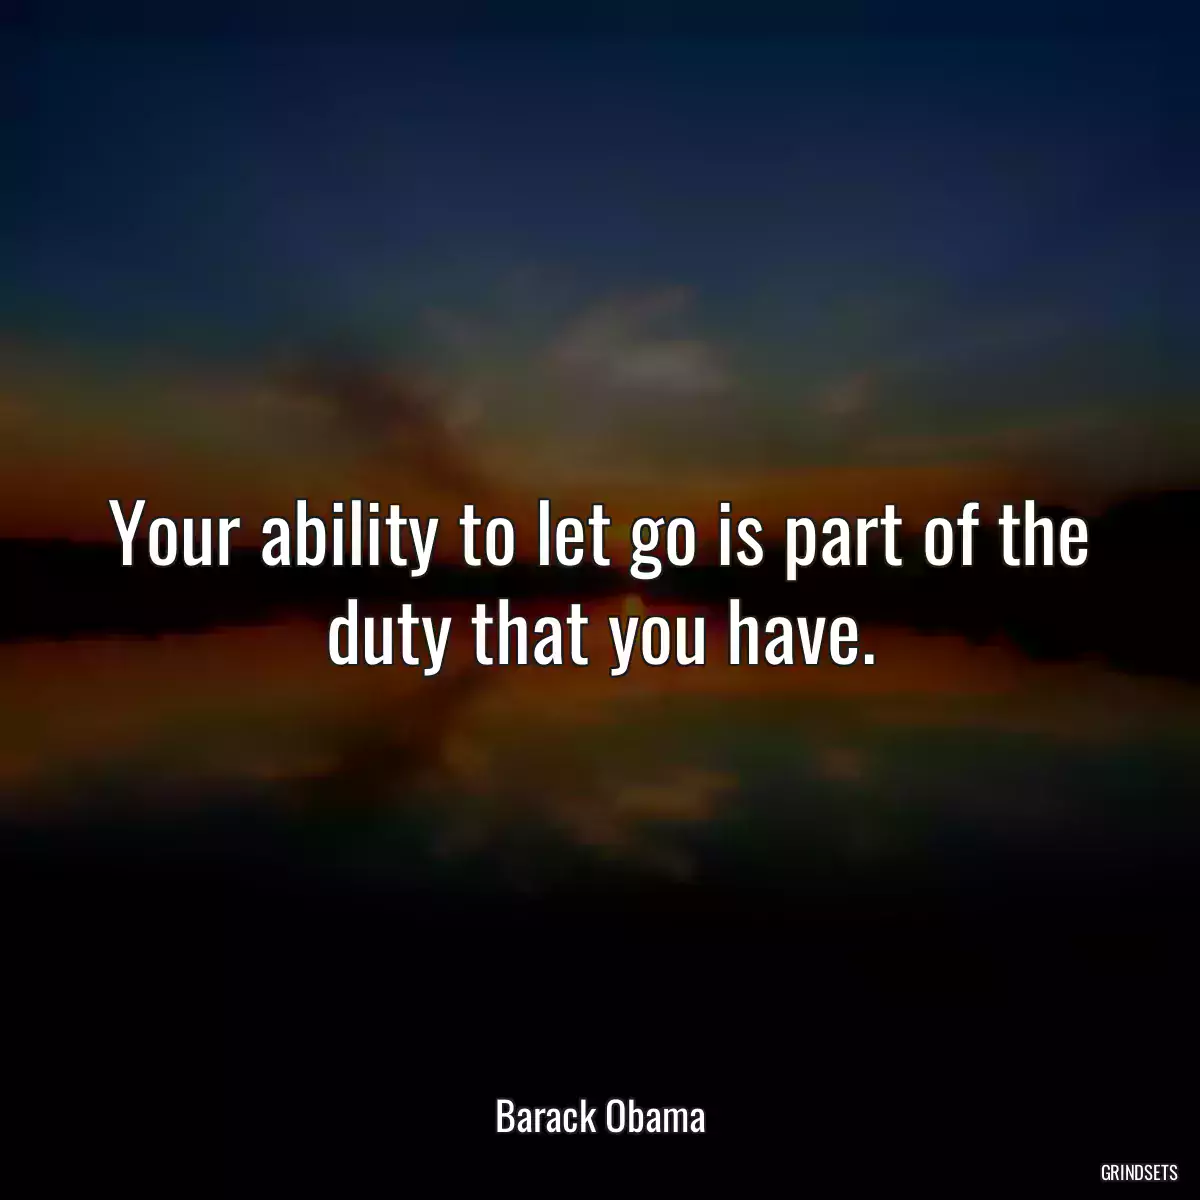 Your ability to let go is part of the duty that you have.